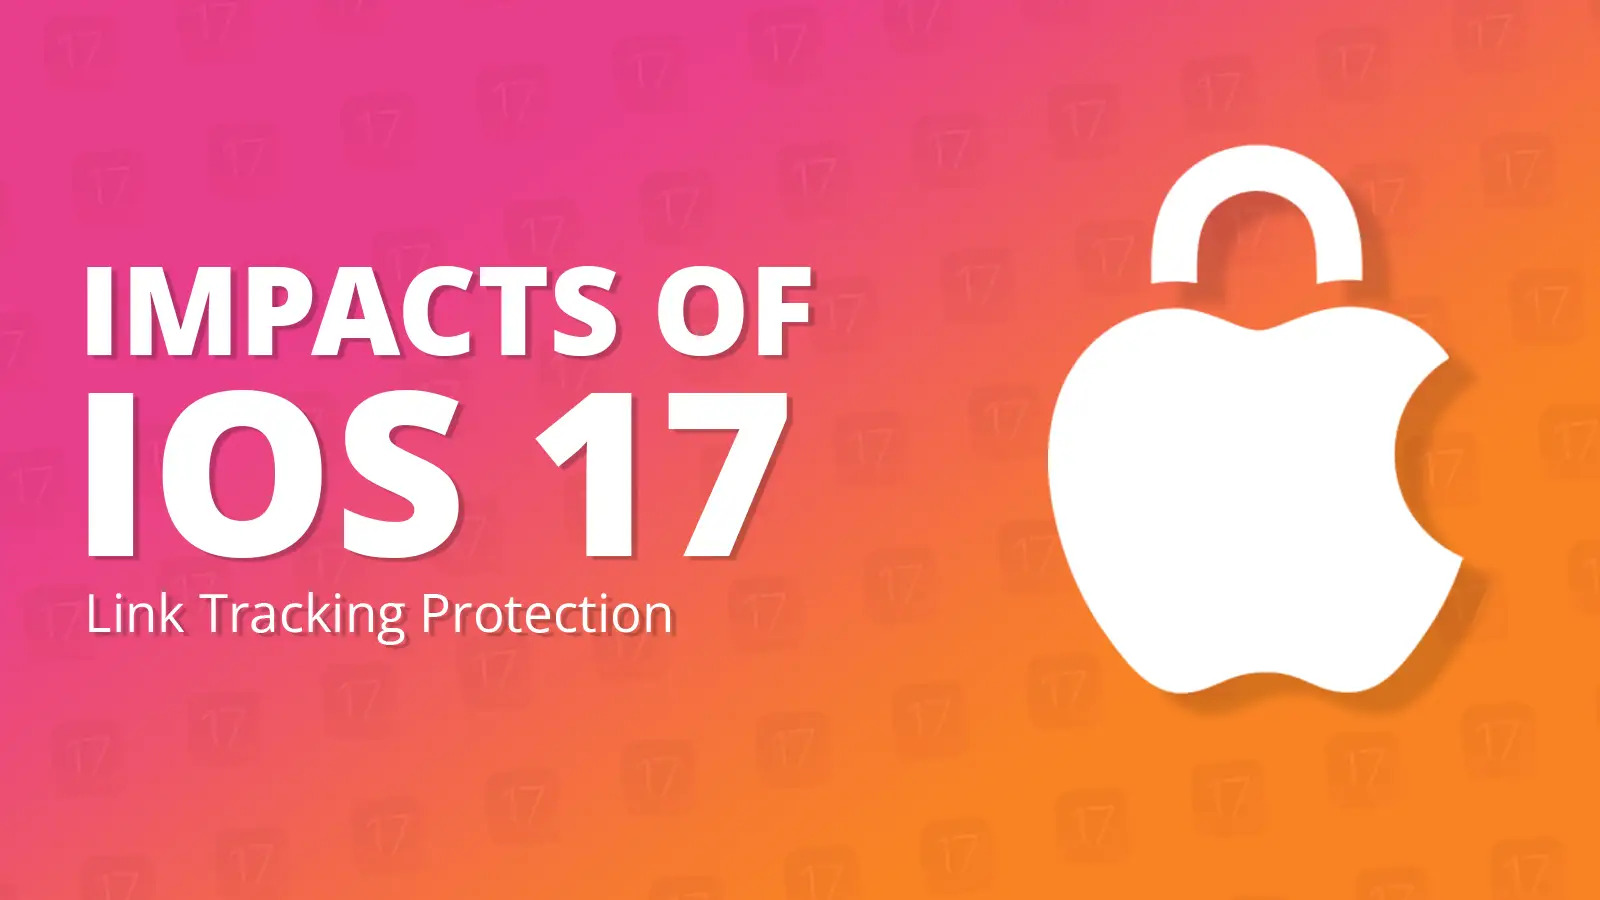 Impacts of IOS 17: Link Tracking Protection